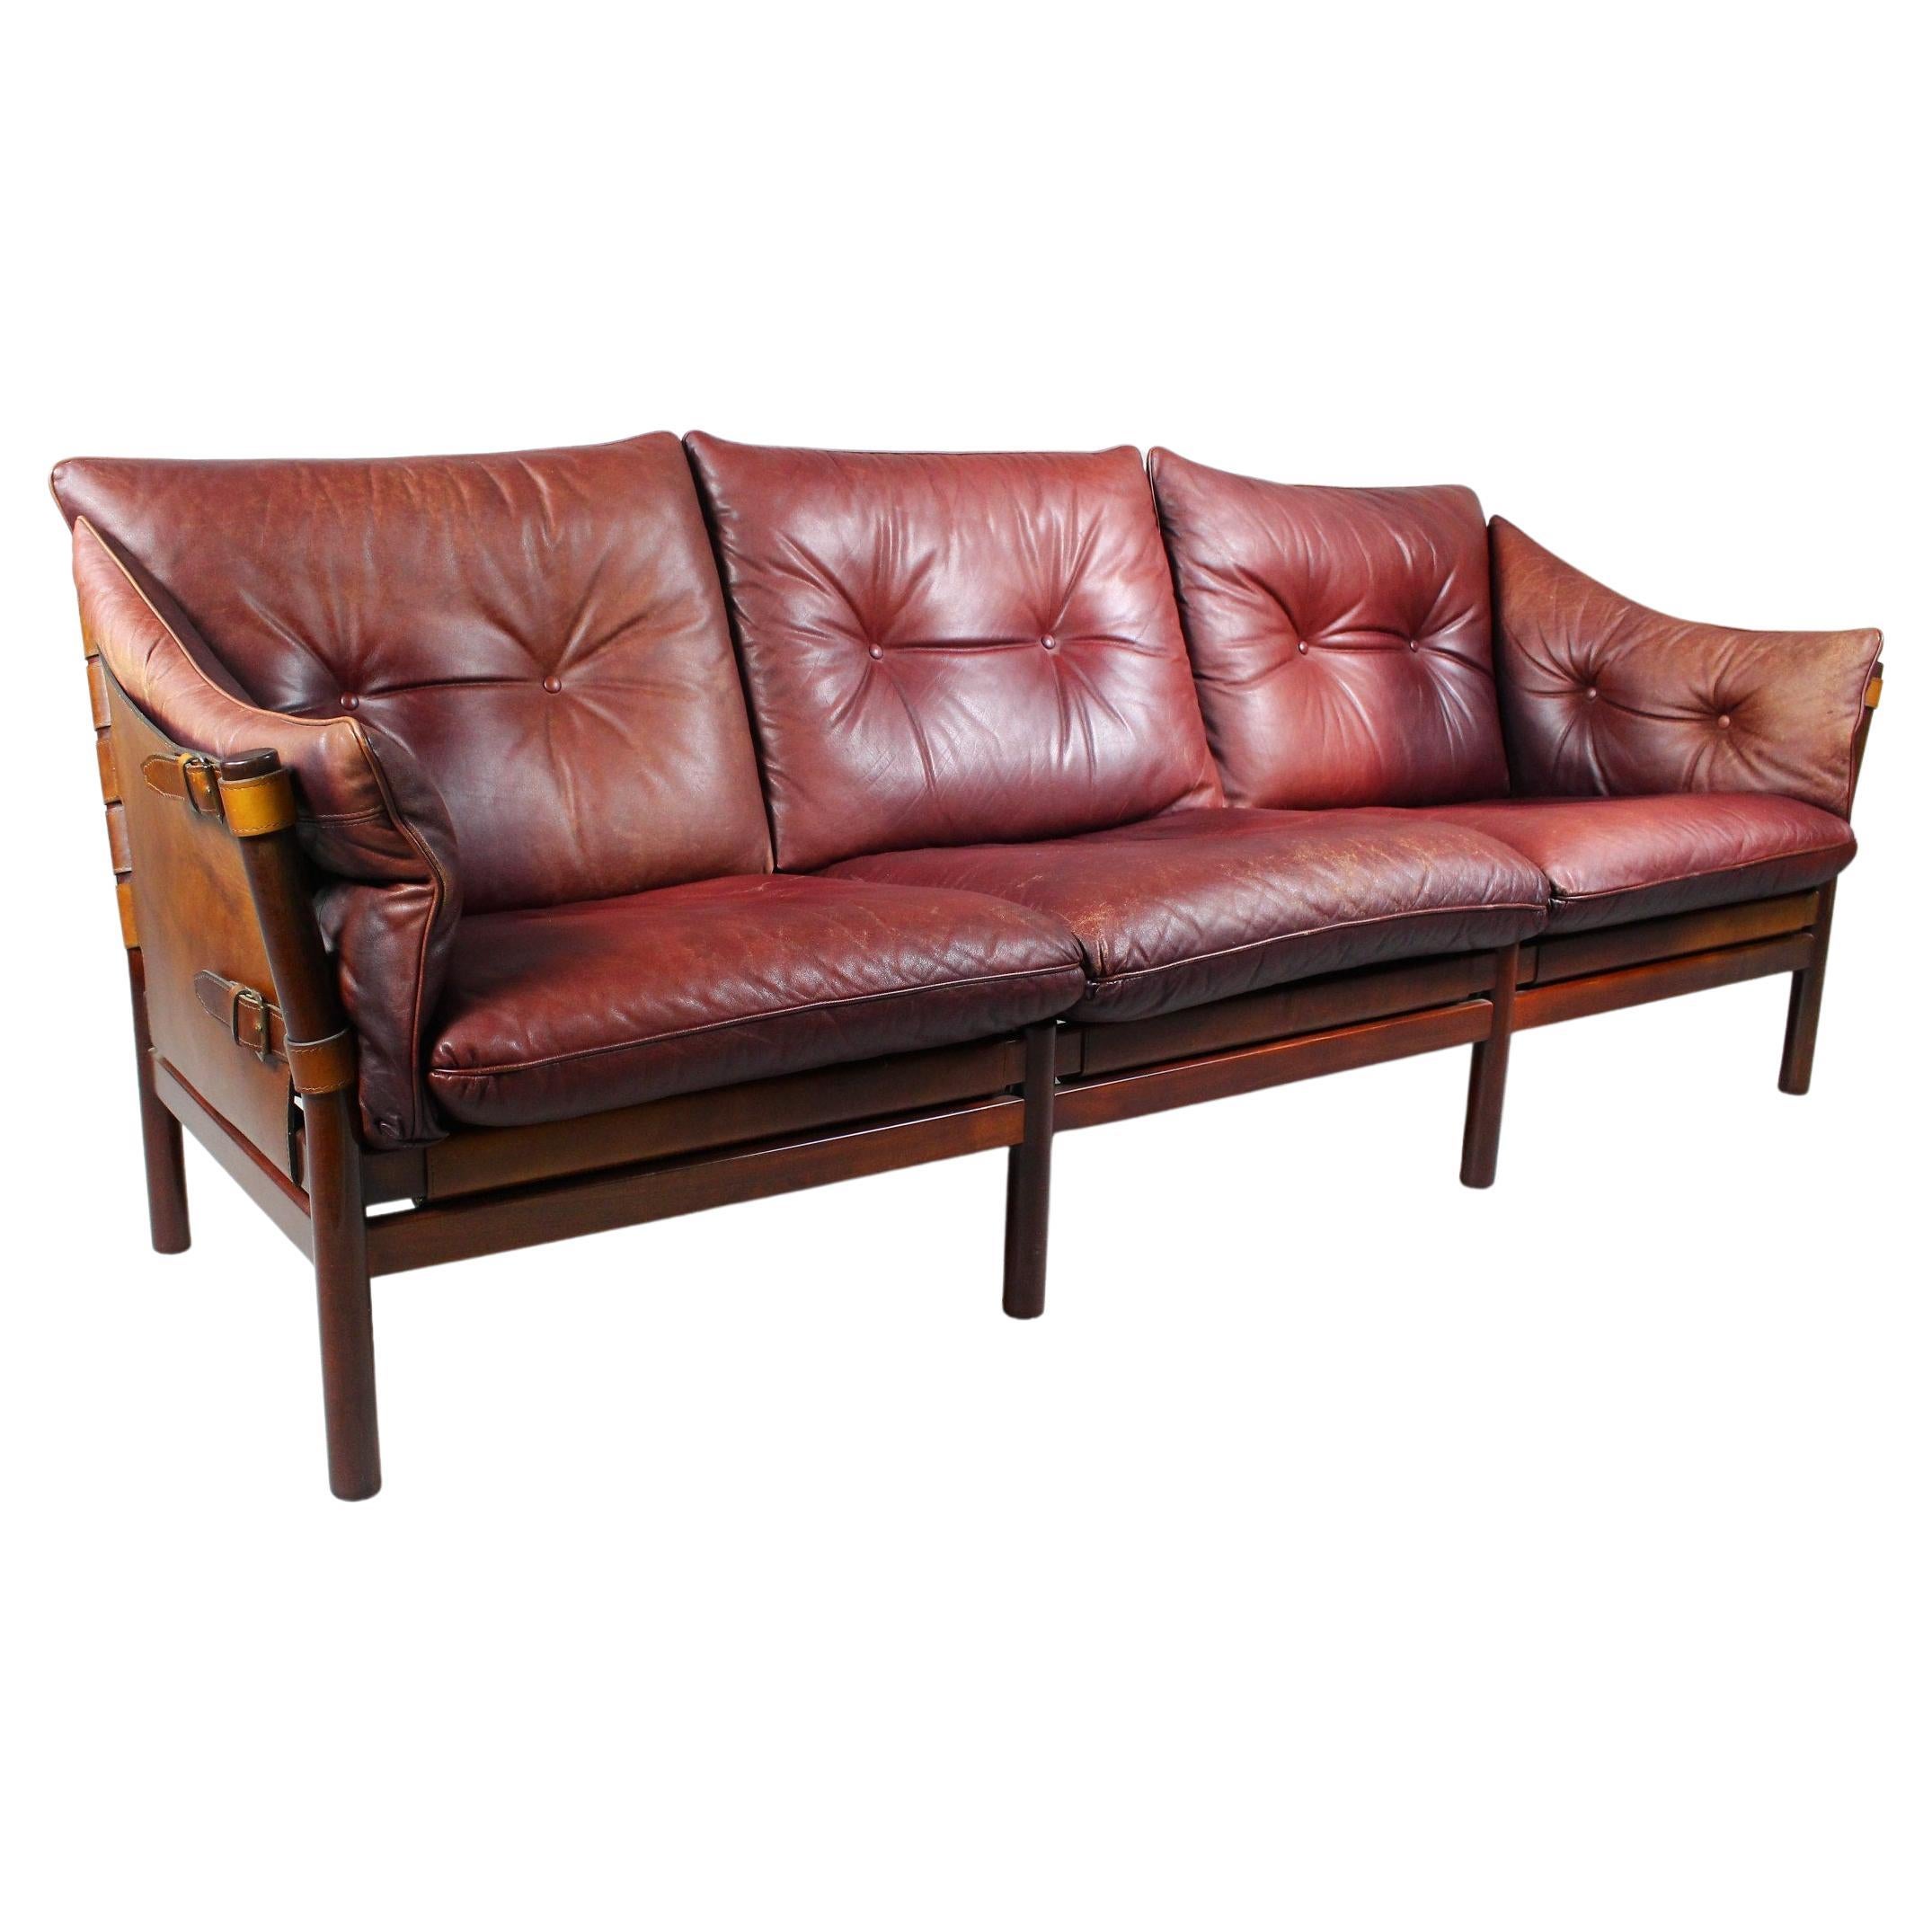 1960s Leather Sofa Ilona by Arne Norell, Aneby Møbler